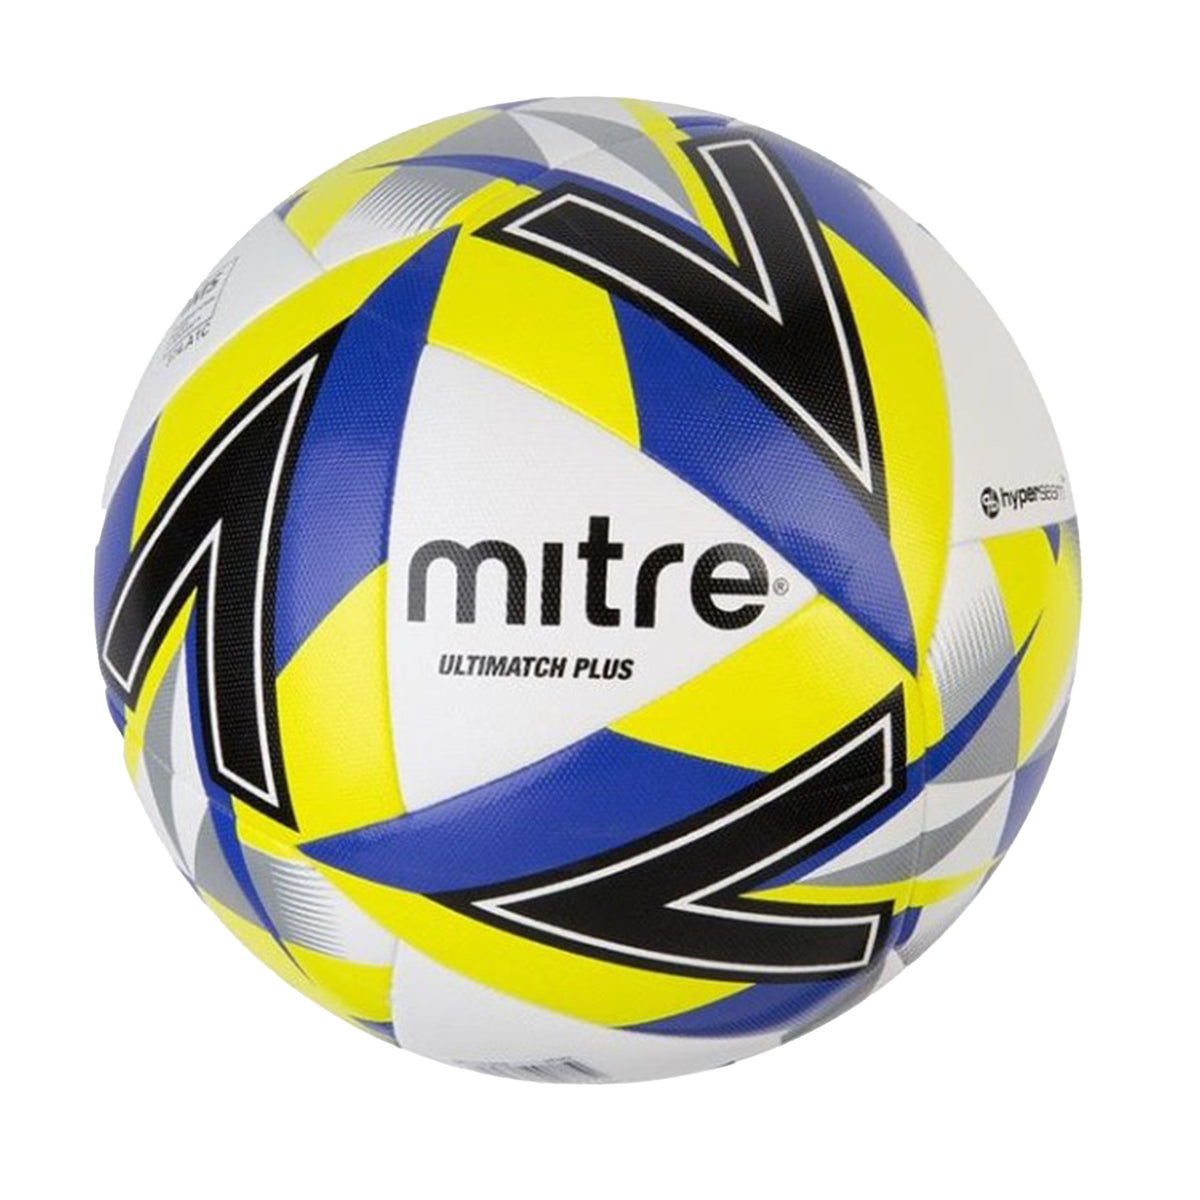 Mitre Ultimatch Plus Football White